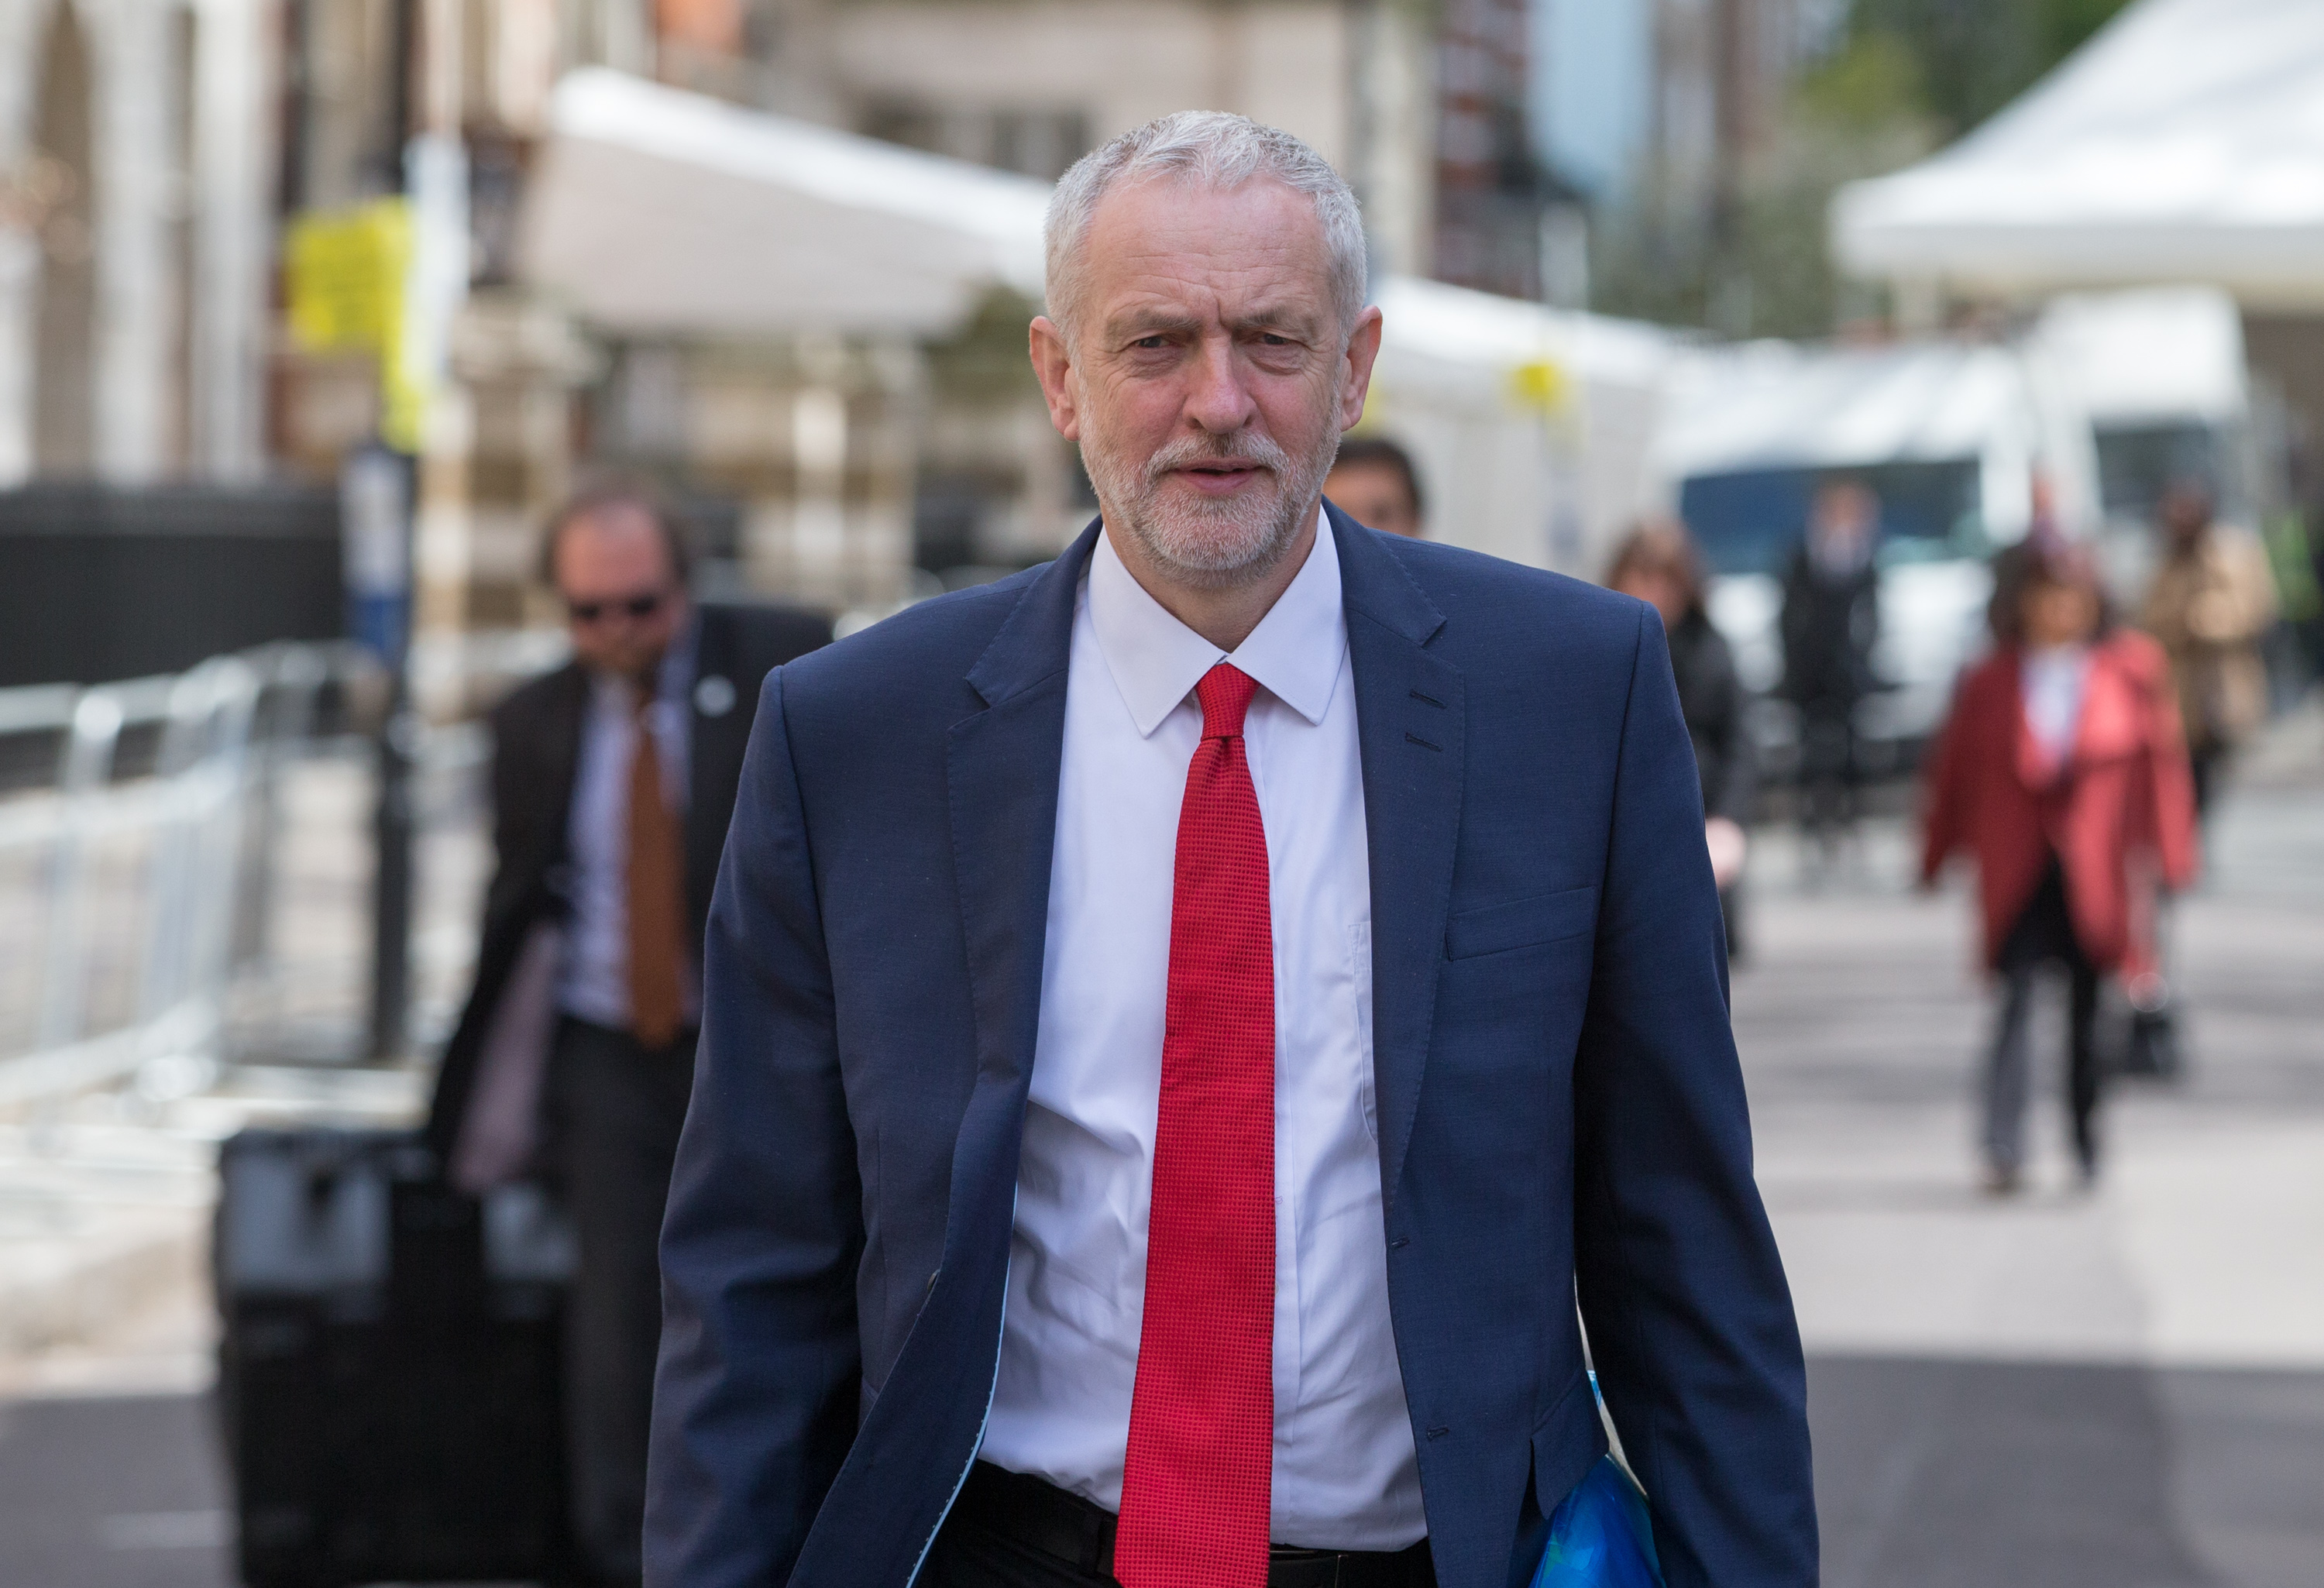 Labour Party leader Jeremy Corbyn leaves after meeting with US President Barack Obama after he spoke at the Royal Horticultural Halls in London on April 23, 2016. (Matt Cardy—Getty Images)